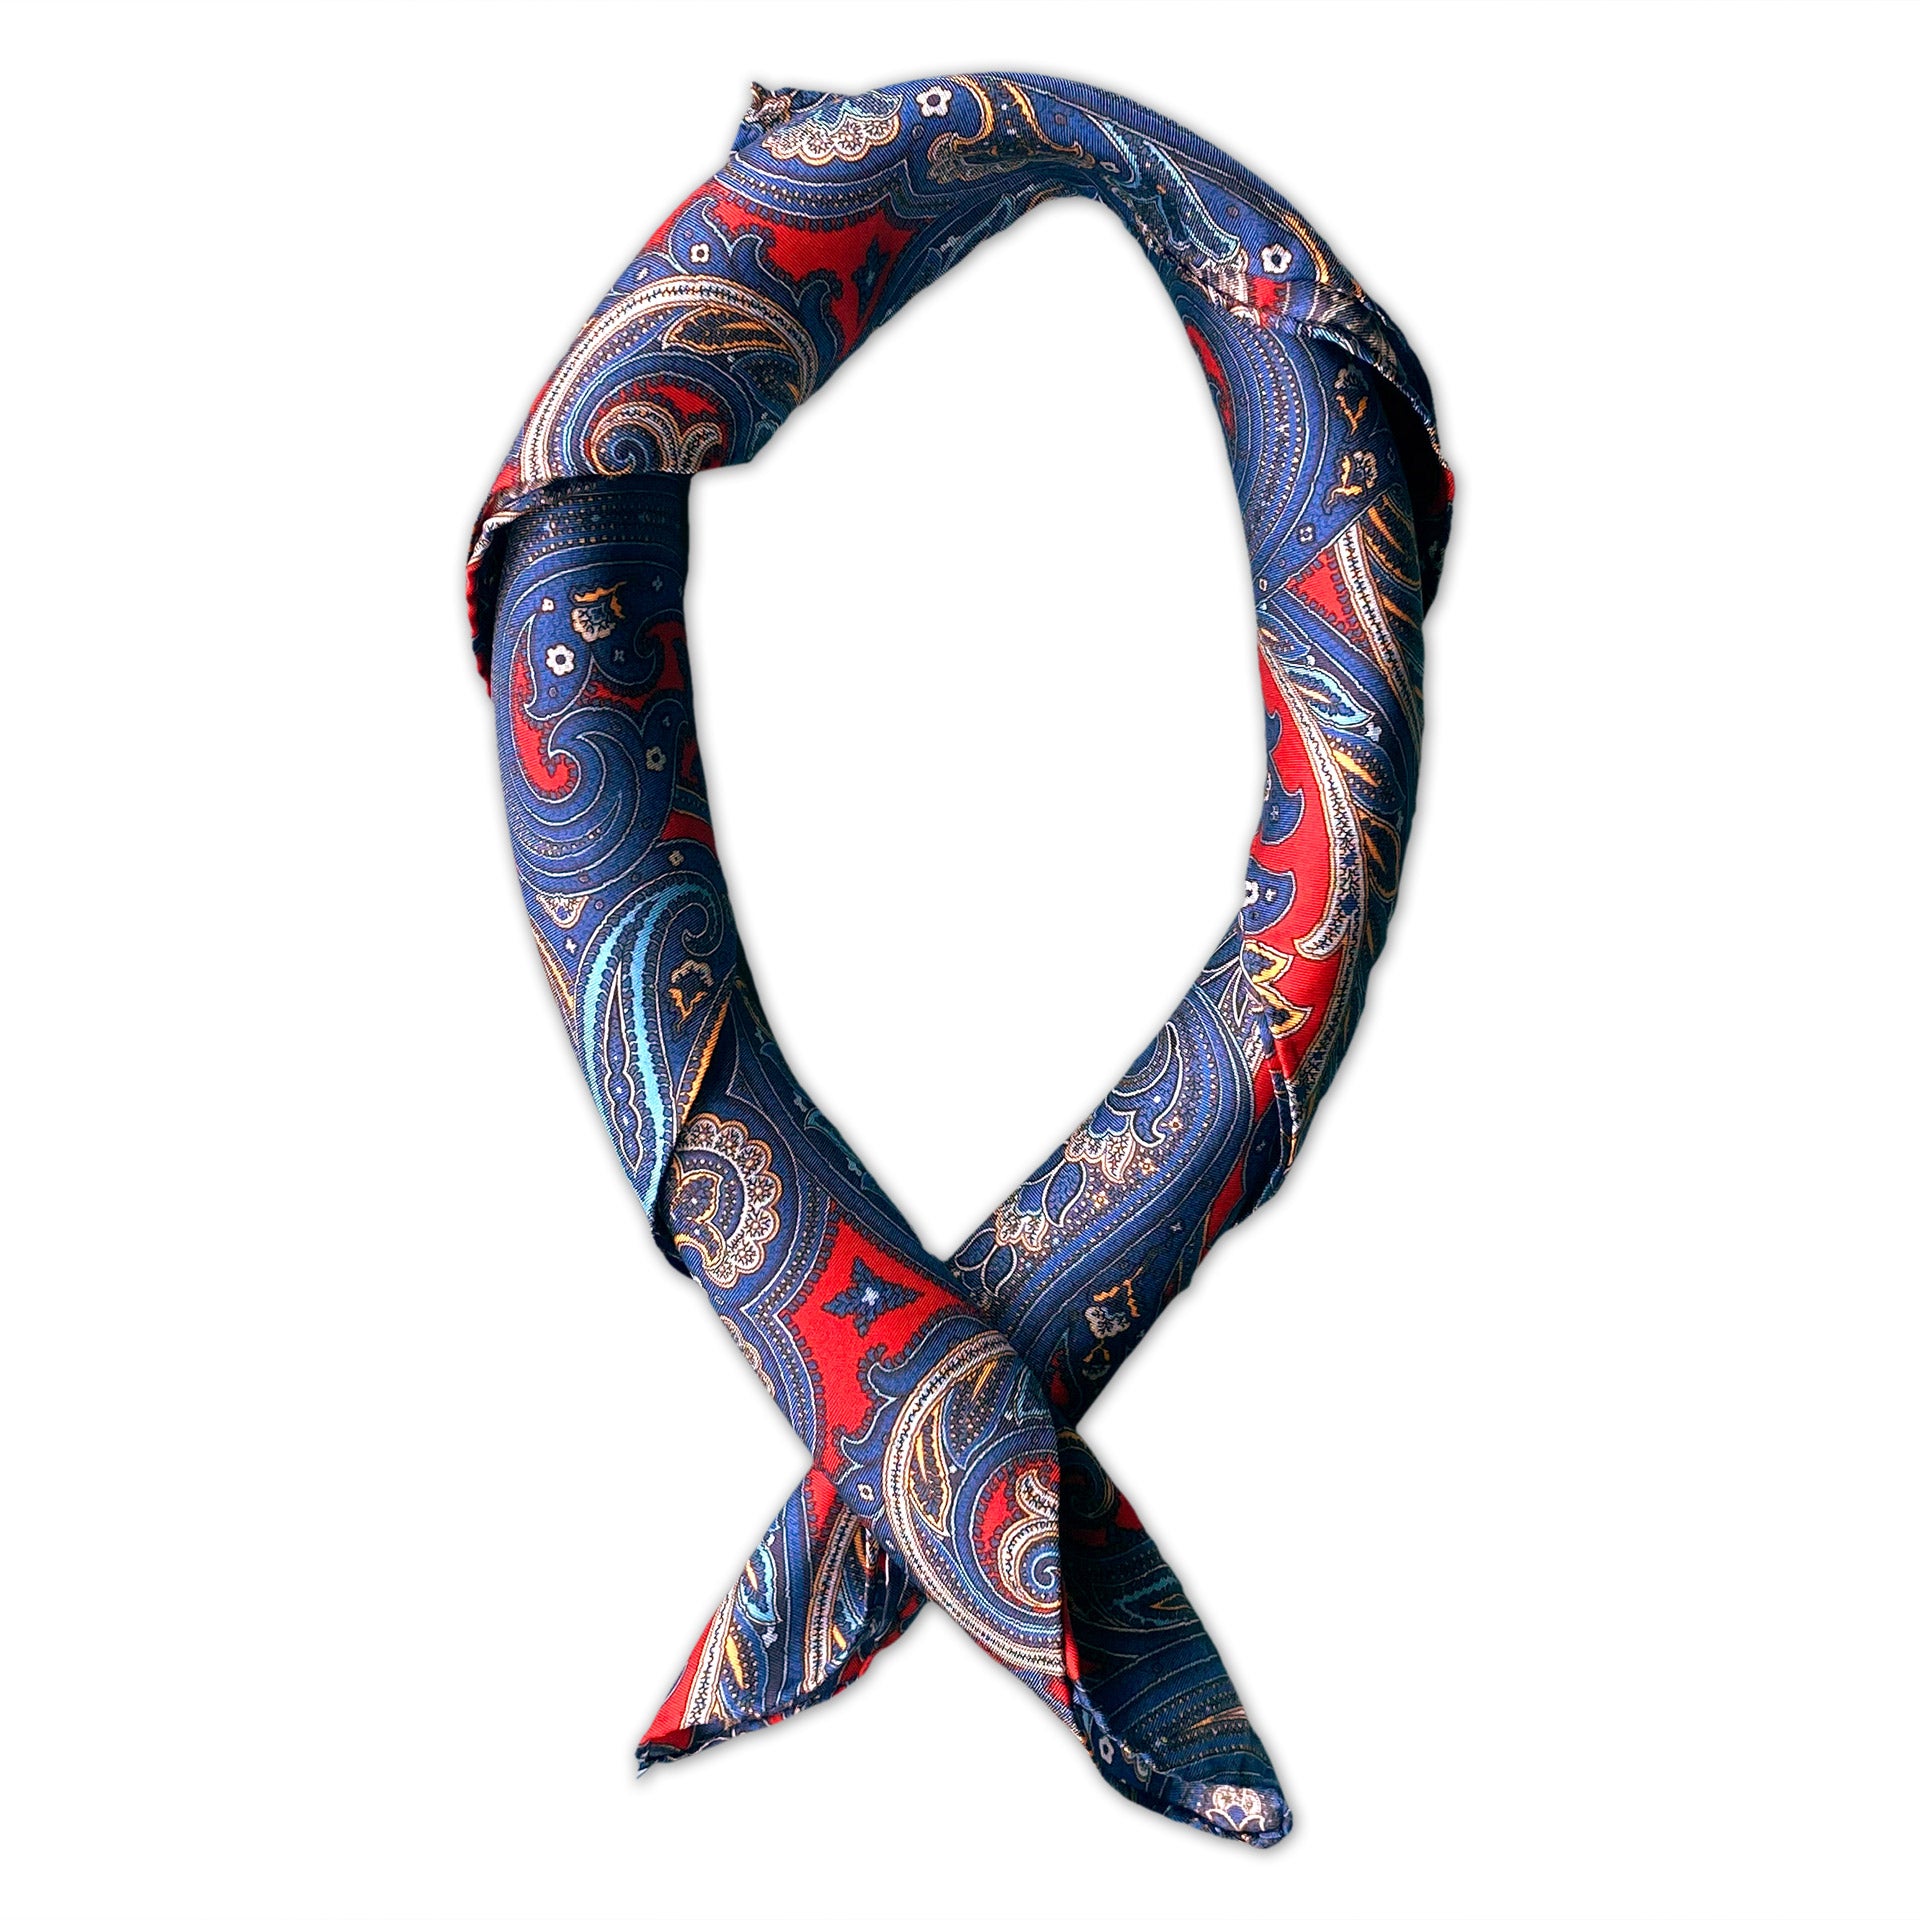 Square scarf rolled into a loop, showing the sheen of the fabric and the striking deep-red and blue contrasts.